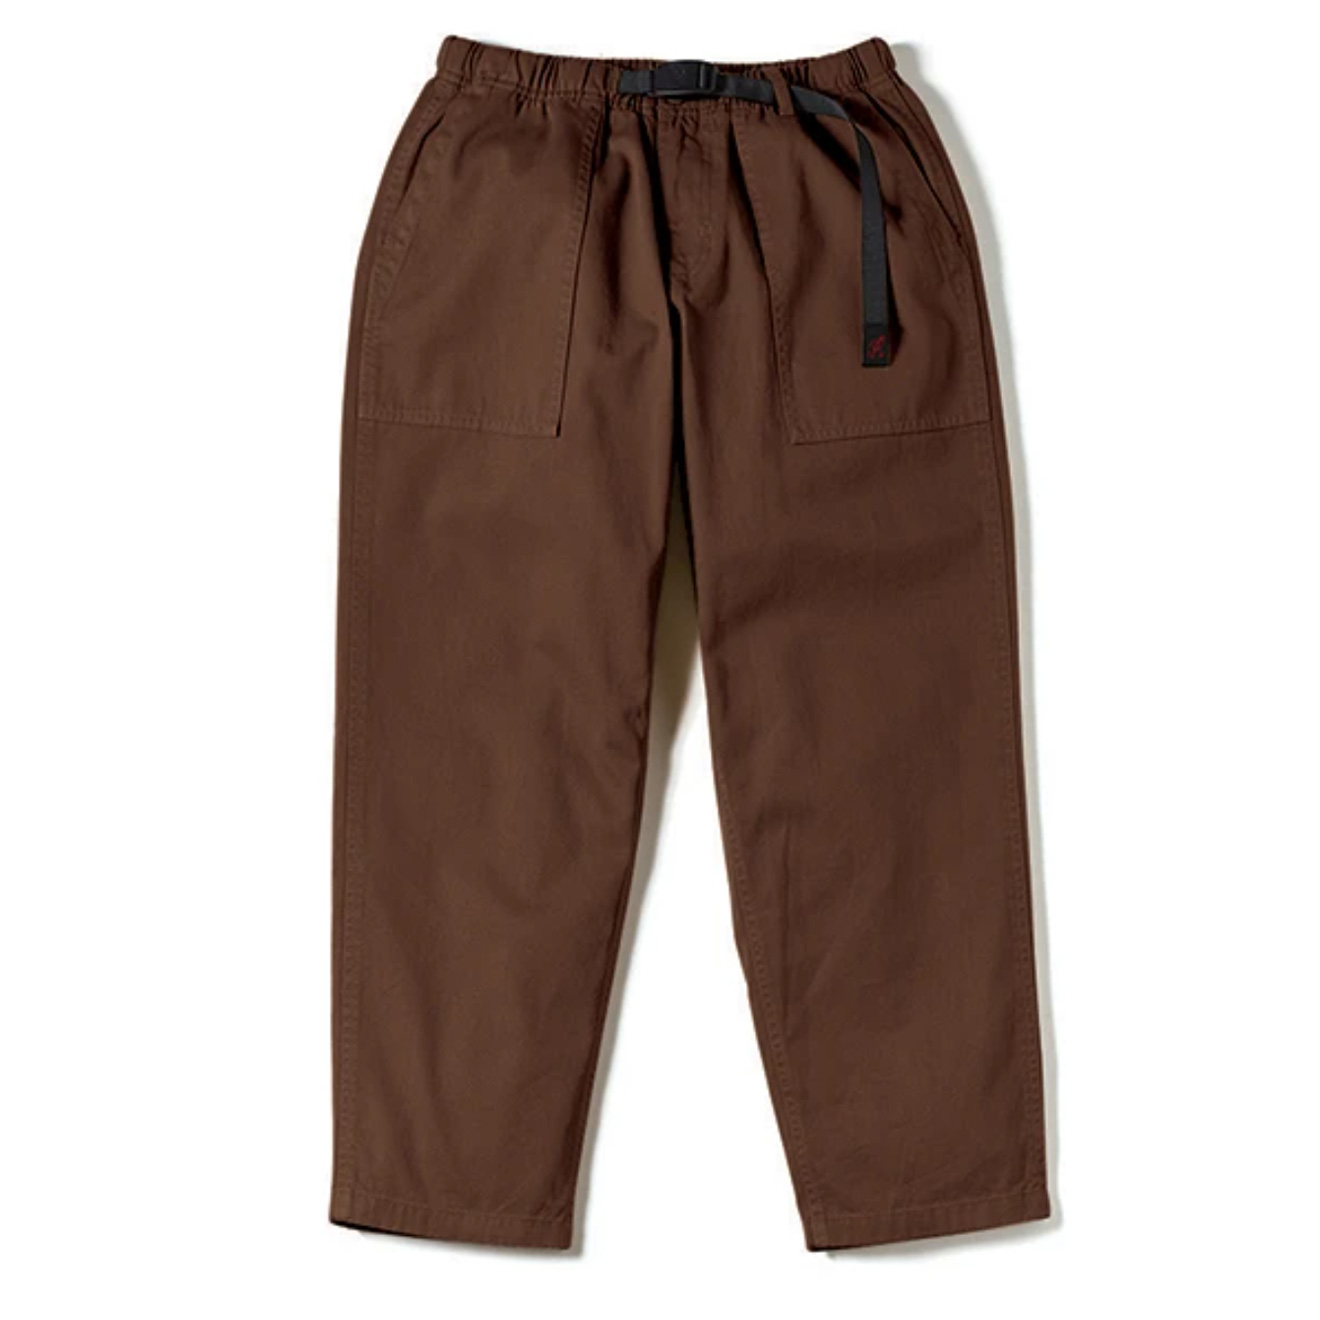 Ten pairs of trousers to see you through summer - Proper Magazine